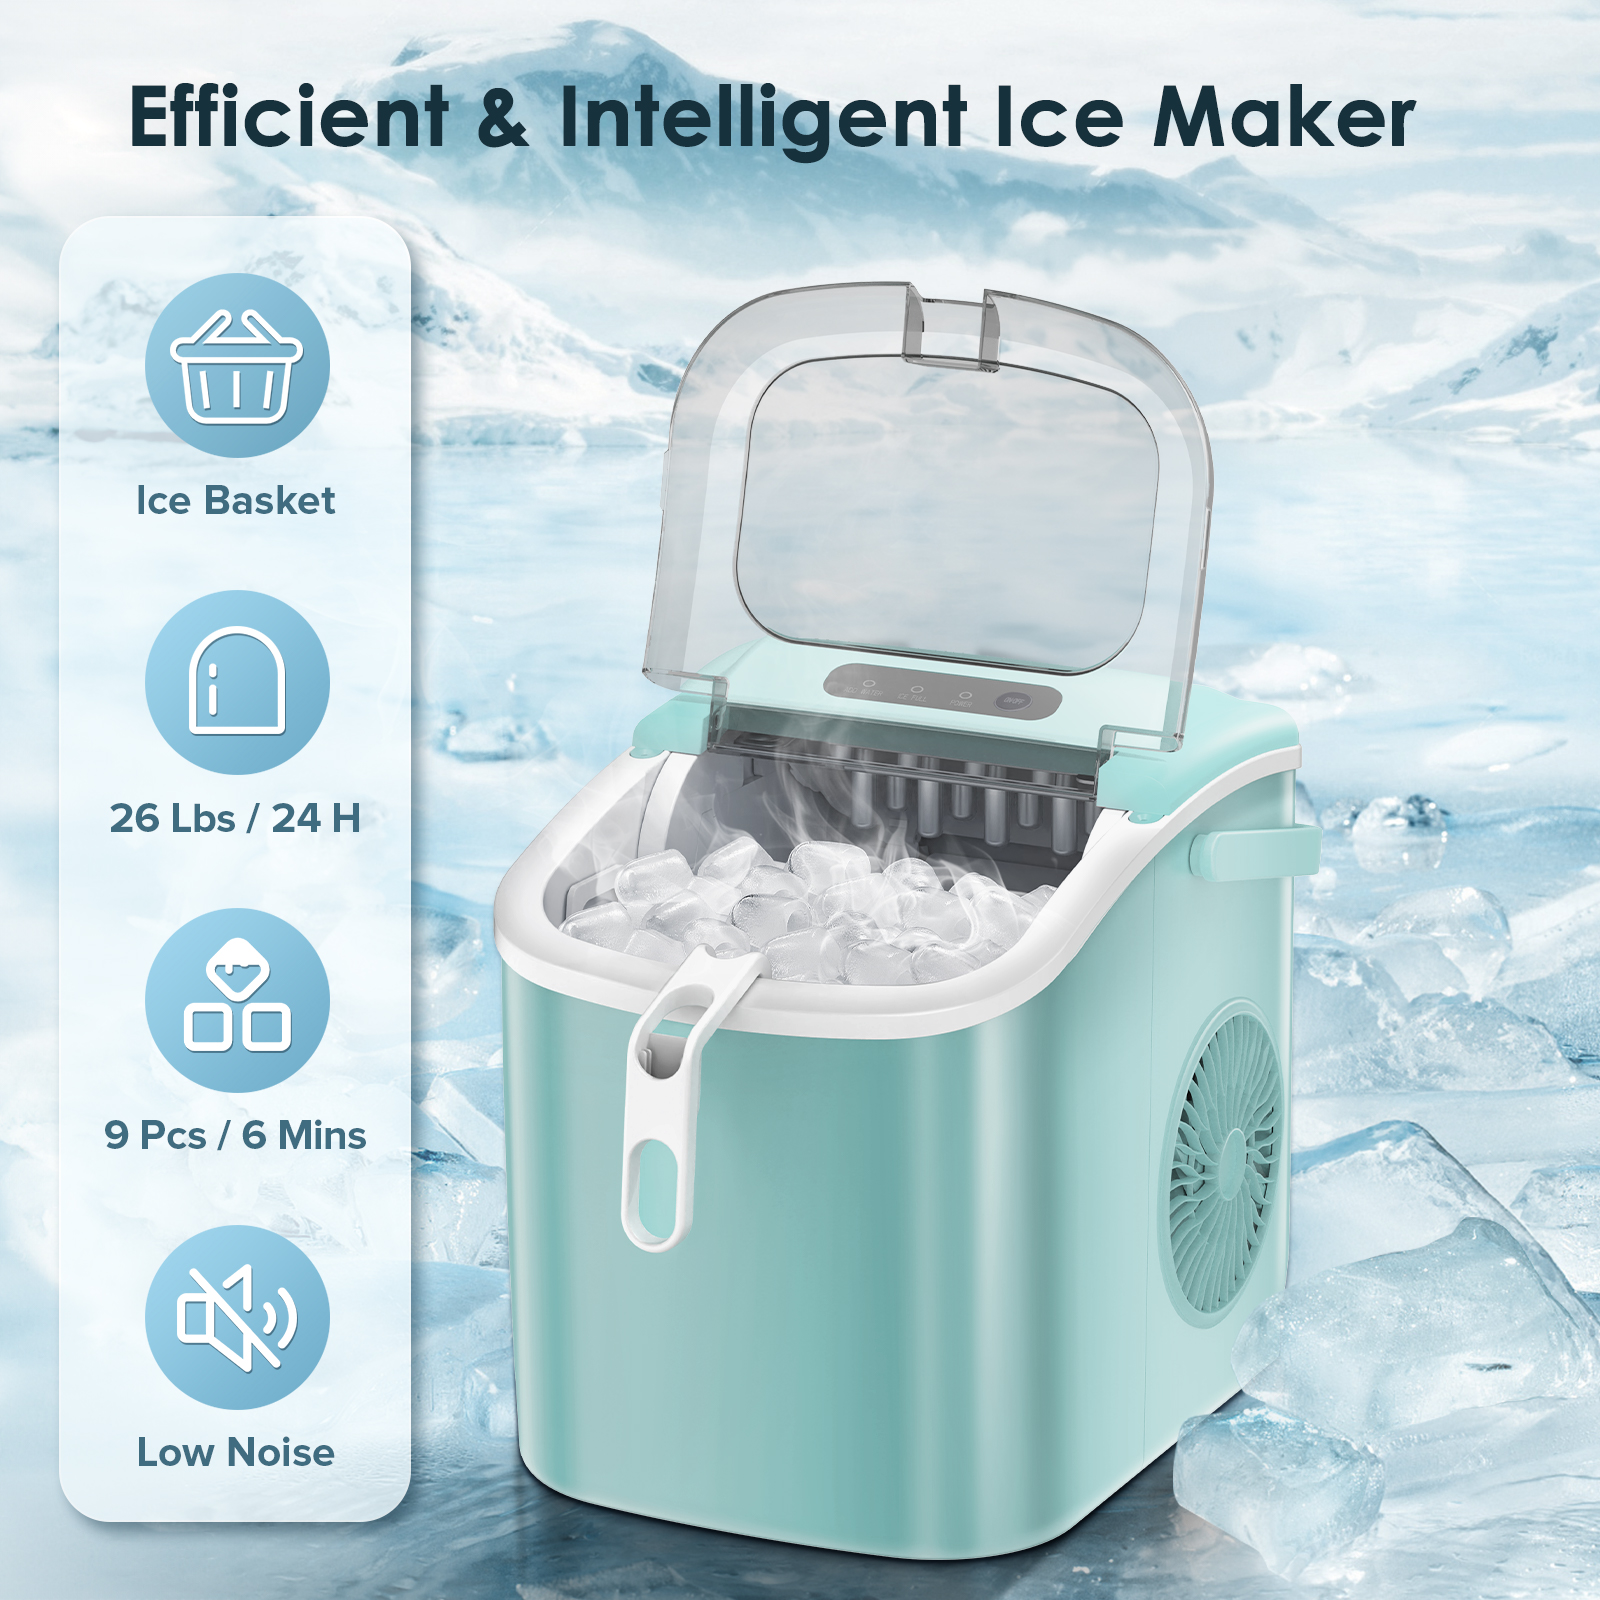 Lhriver Countertop Ice Maker, Portable Ice Machine with Handle, 26Lbs/24H, 9Pcs/6Mins, One-Click Operation Ice Makers, with Ice Scoop and Basket, for